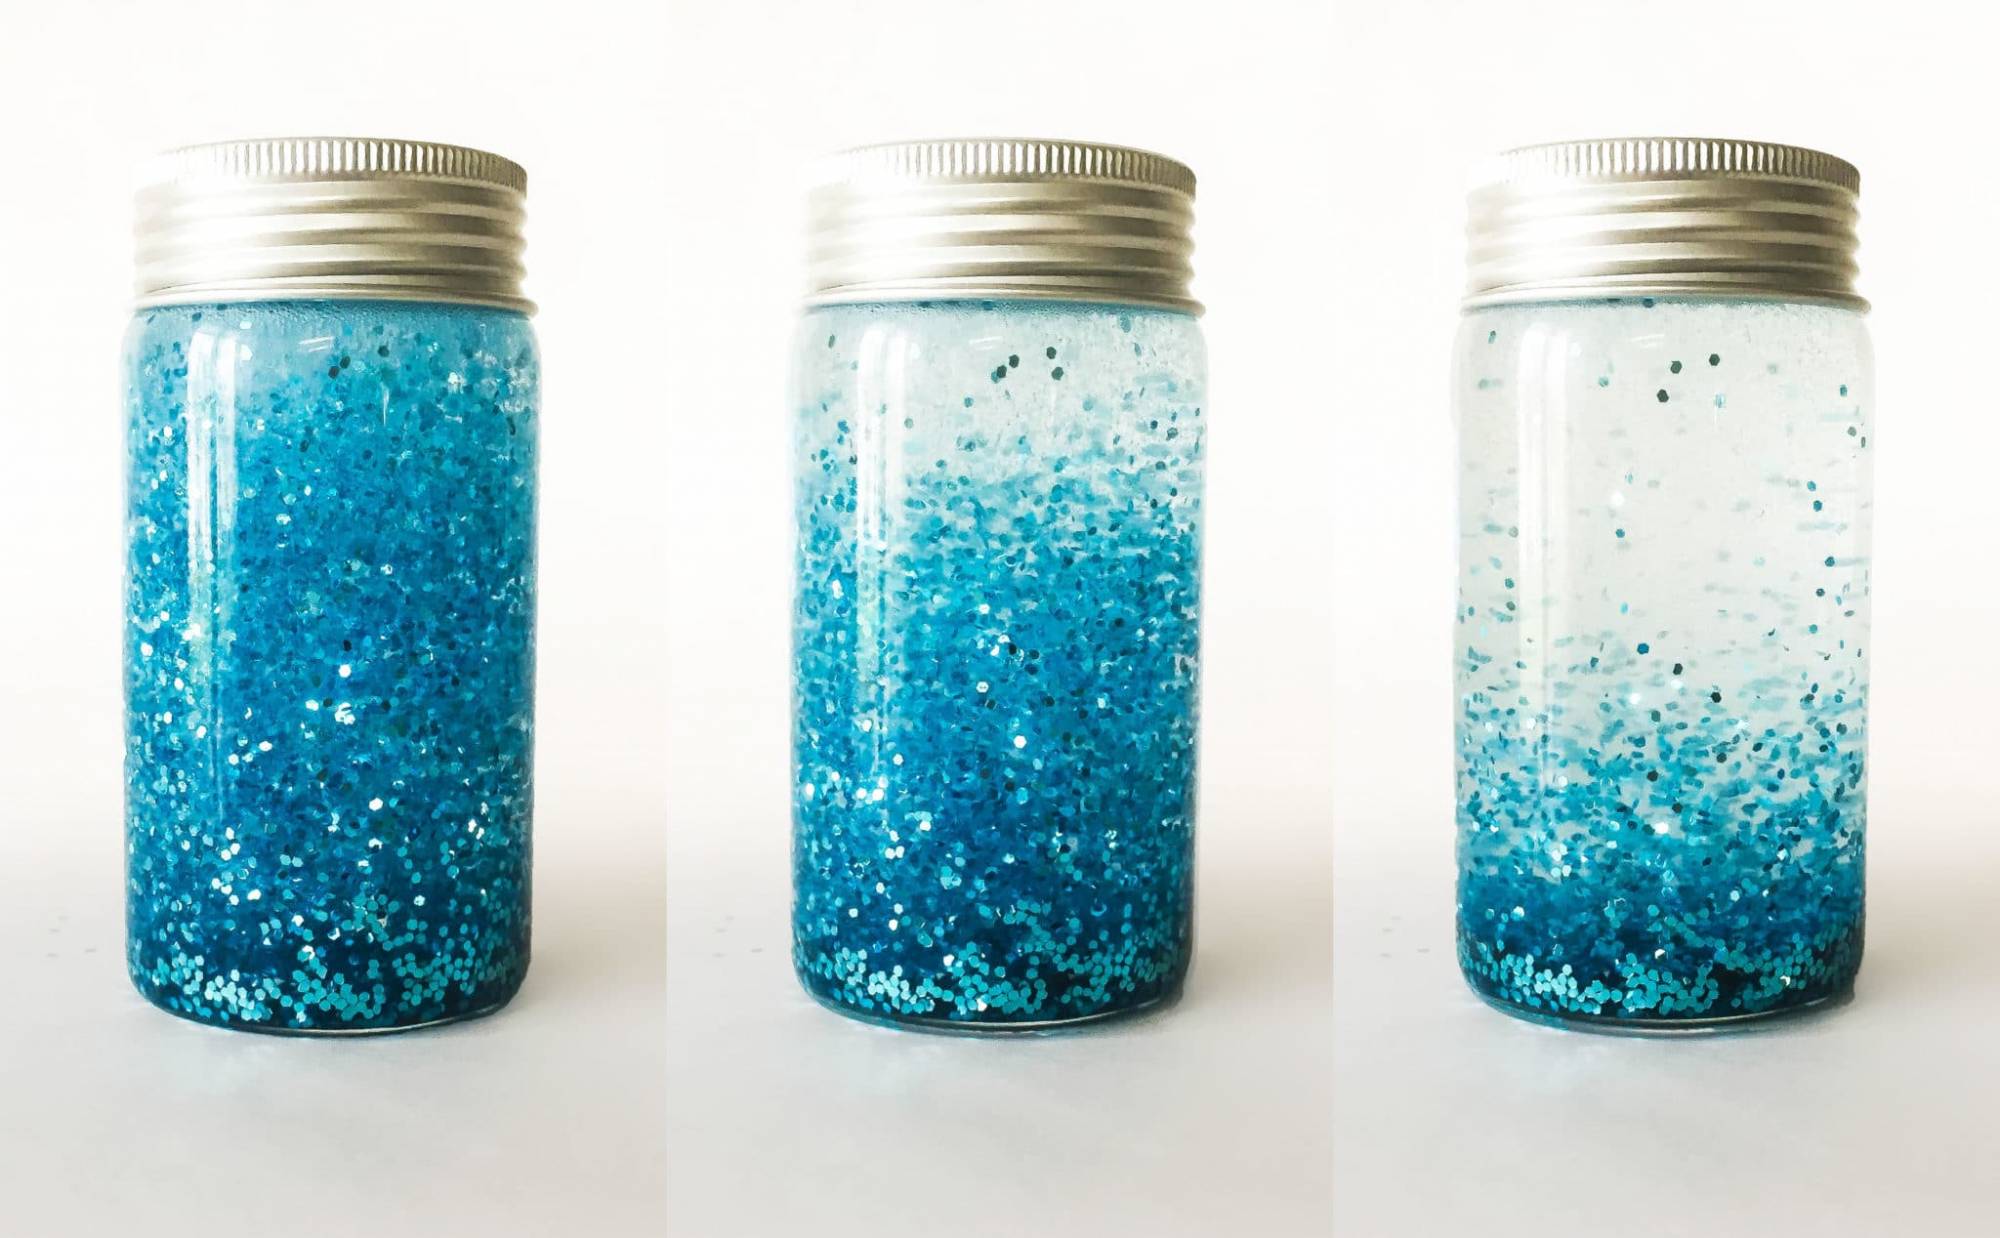 https://www.anythinklibraries.org/sites/default/files/styles/full/public/event/field_event_image/glitter_jar.jpg?itok=-jaC6H-Q